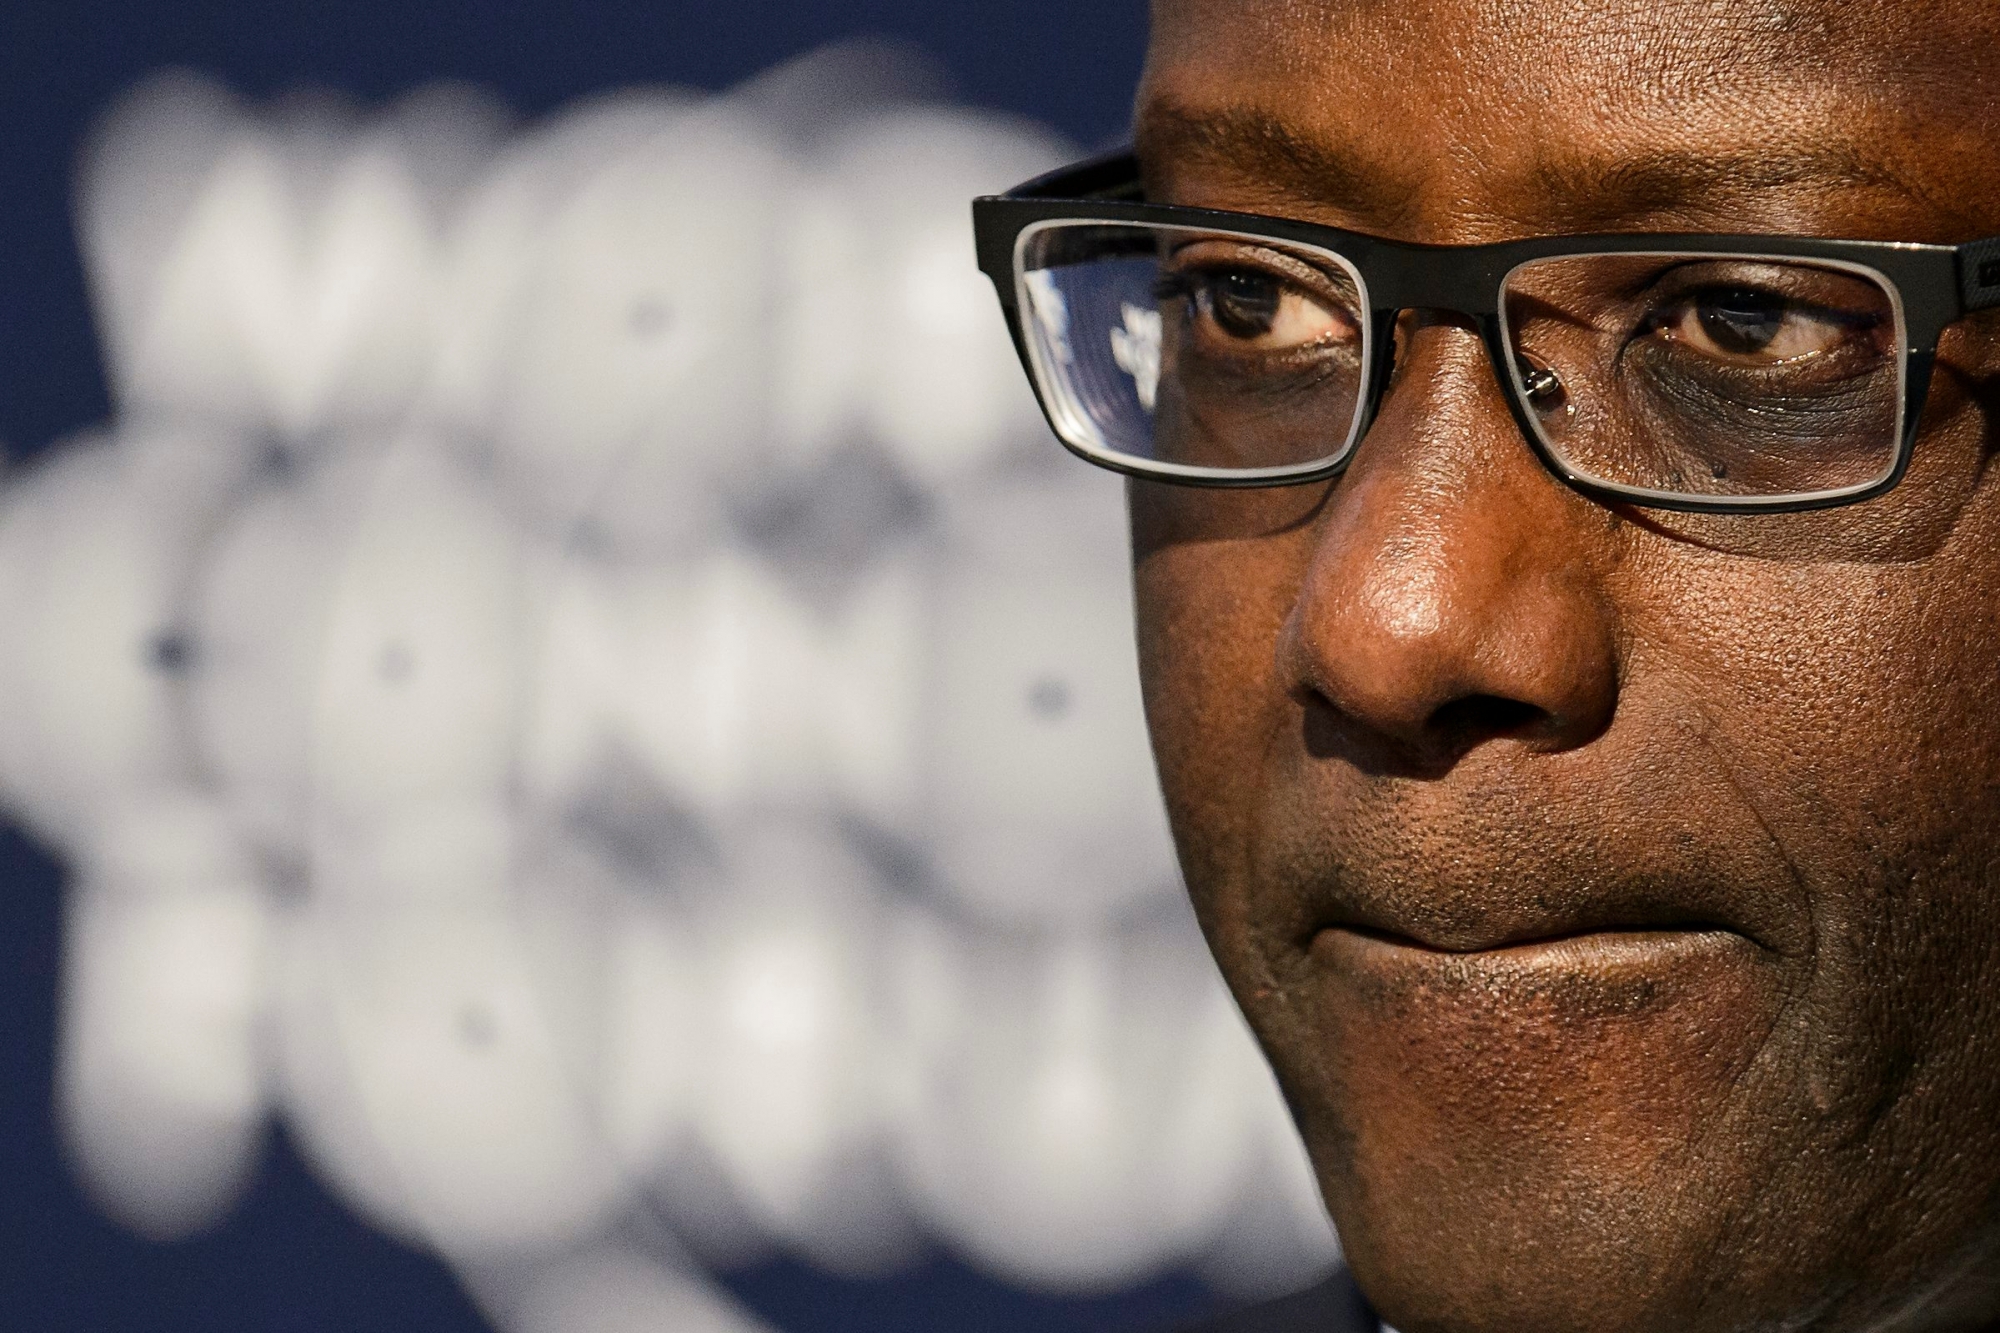 Tidjane Thiam, CEO of Swiss bank Credit Suisse, speaks during a panel session the first day of the 46th Annual Meeting of the World Economic Forum, WEF, in Davos, Switzerland, Wednesday, January 20, 2016. The overarching theme of the Meeting, which takes place from 20 to 23 January, is "Mastering the Fourth Industrial Revolution". (KEYSTONE/Jean-Christophe Bott) SWITZERLAND WEF 2016 DAVOS